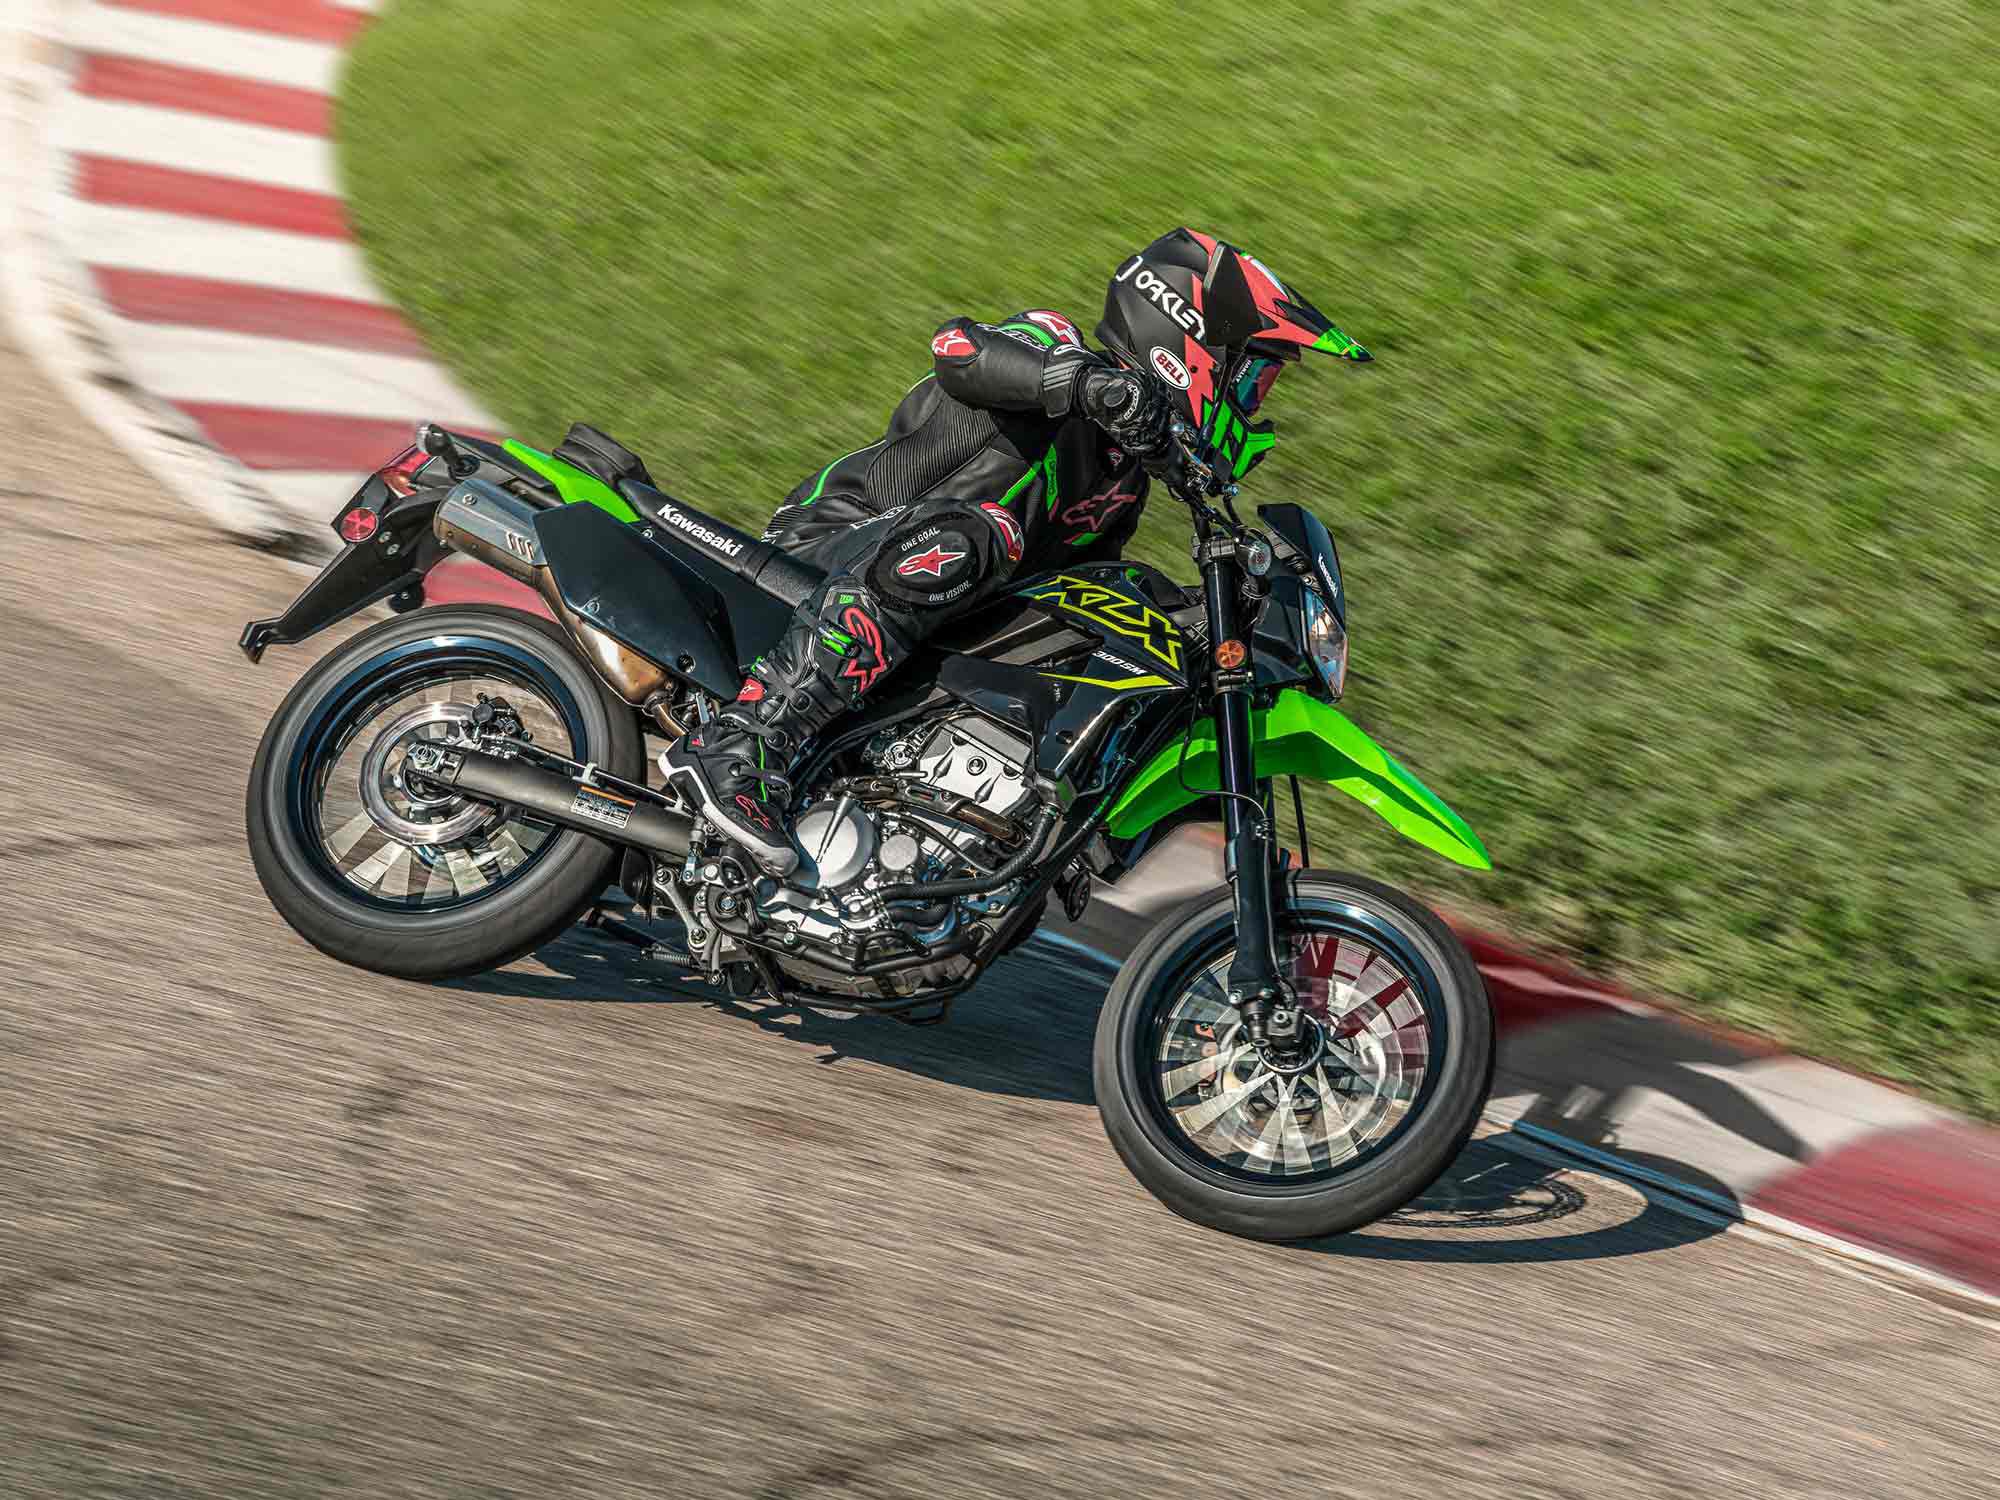 A balance of performance and approachability make the Kawasaki KLX300SM attractive to true beginners and experienced veterans alike.